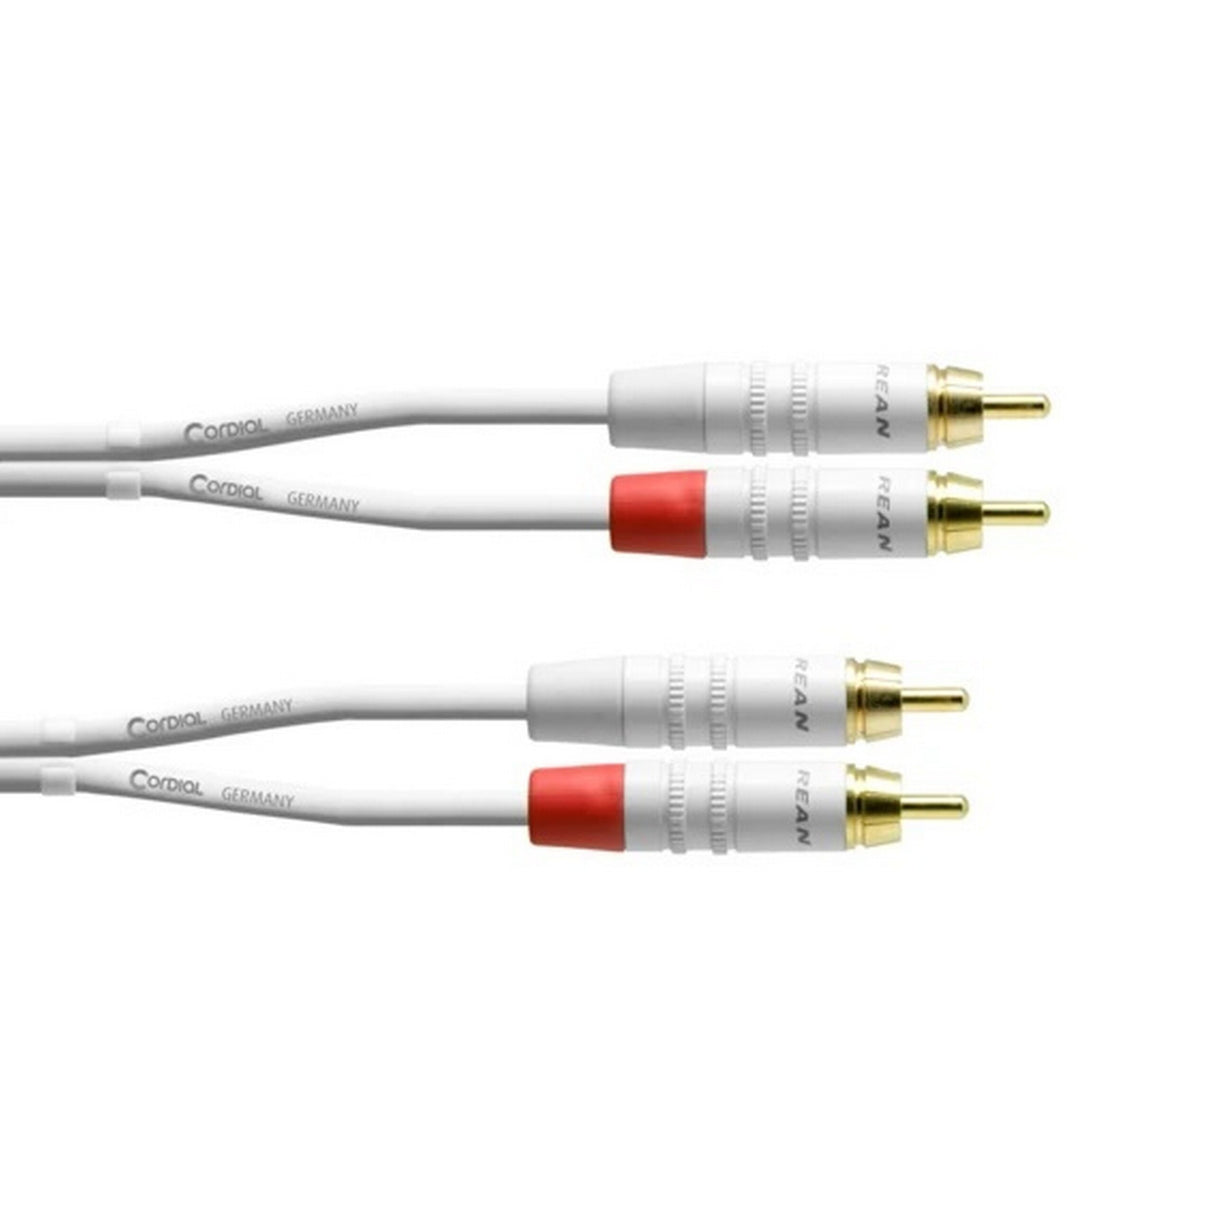 Cordial CFU 1.5 CC-SNOW 2 x RCA to 2 x RCA Twin Cable/Adapter, White, 5-Feet